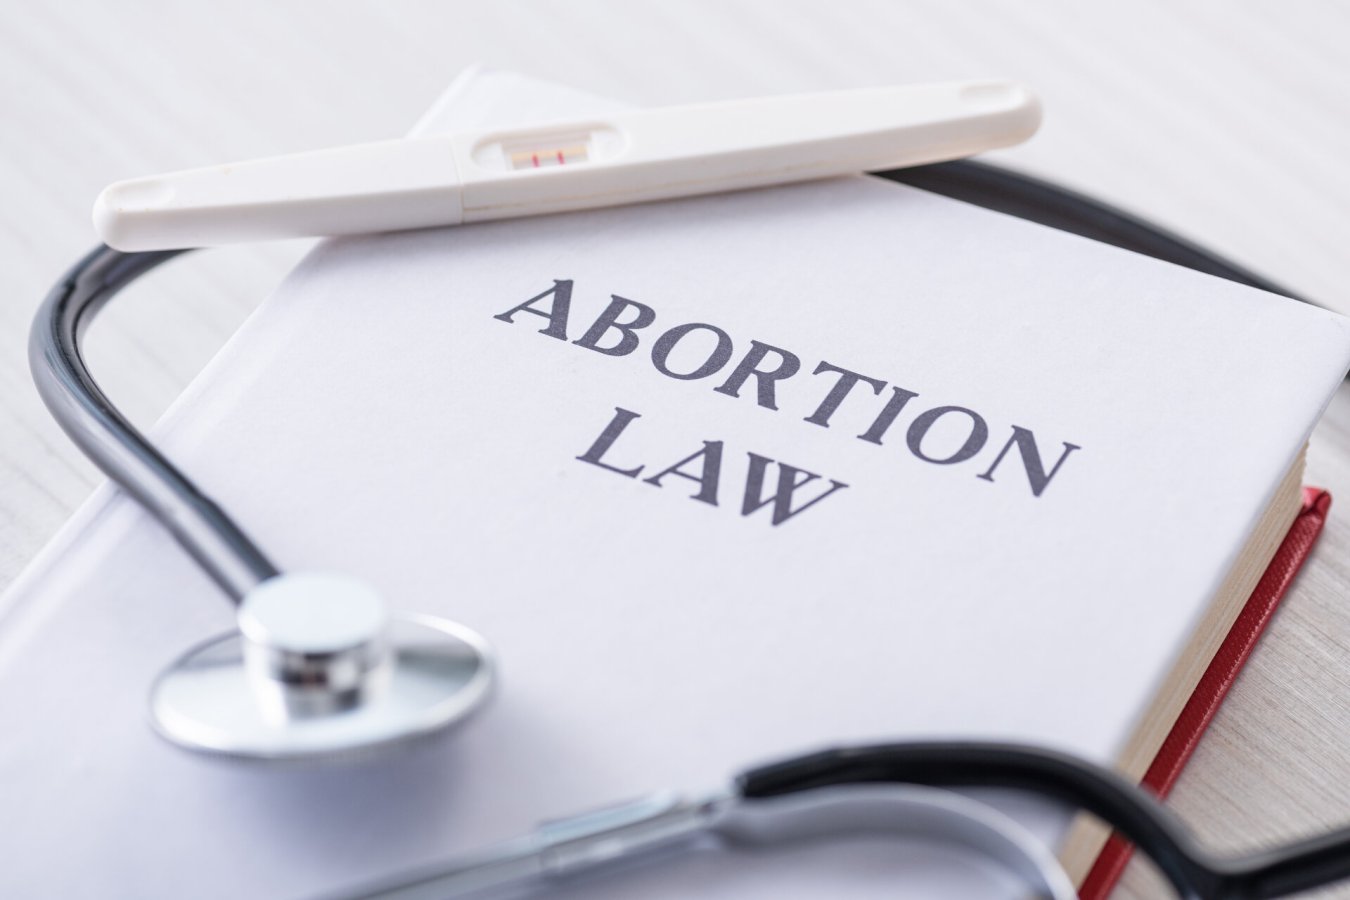 Here’s why abortion laws don’t affect just women